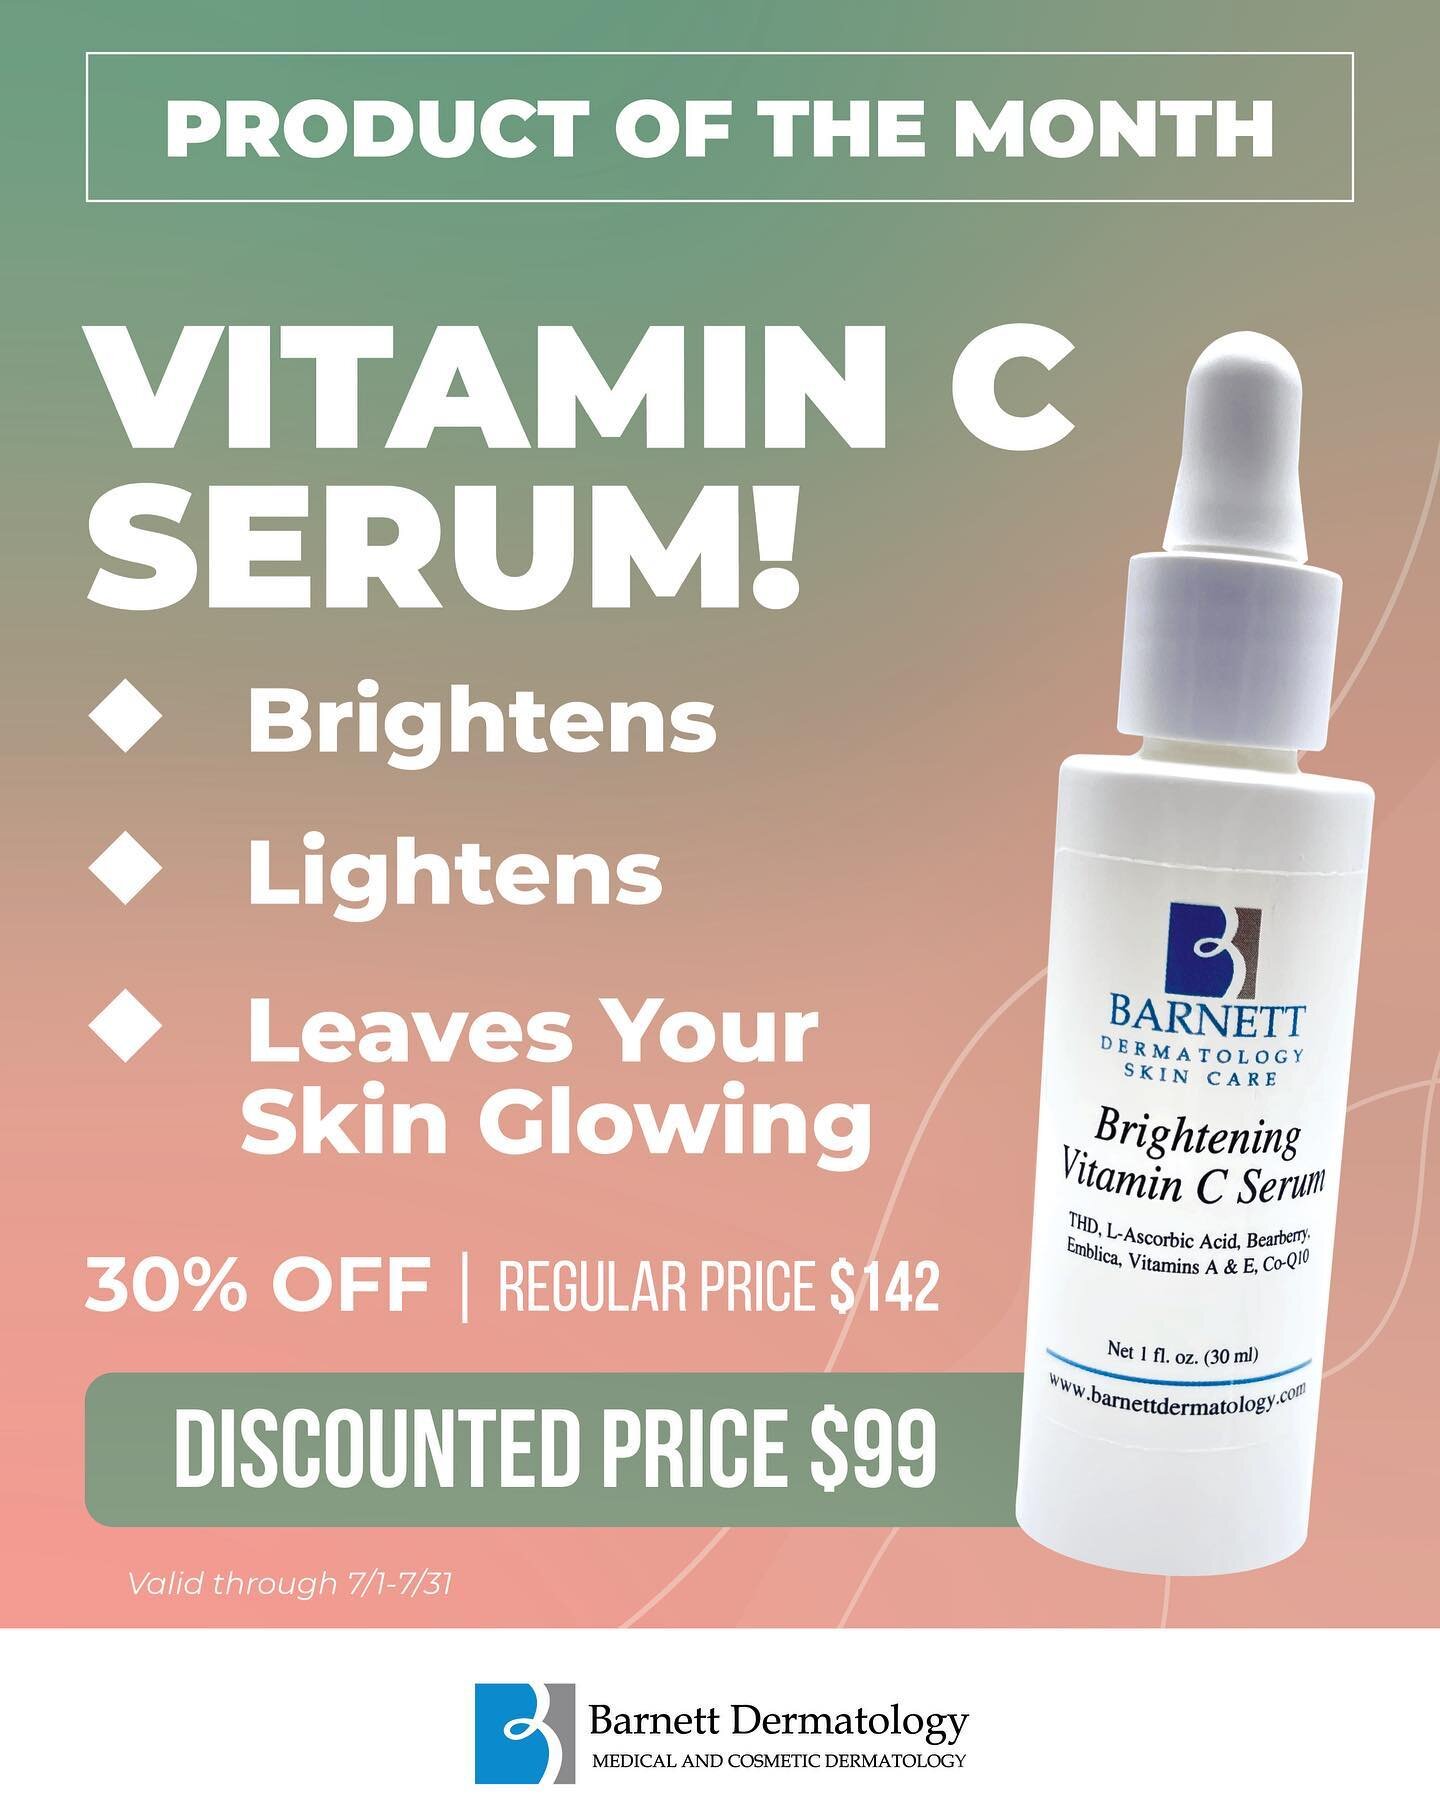 ✨The Product of the Month is our Vitamin C Serum✨
 
For the month of July our Vitamin C serum is just $99 😍

Q:Why use vitamin c serum? 
A: Vitamin C serum lightens &amp; brightens the skin. 

Q: Is it safe for all skin types? 
A: YES! All skin type